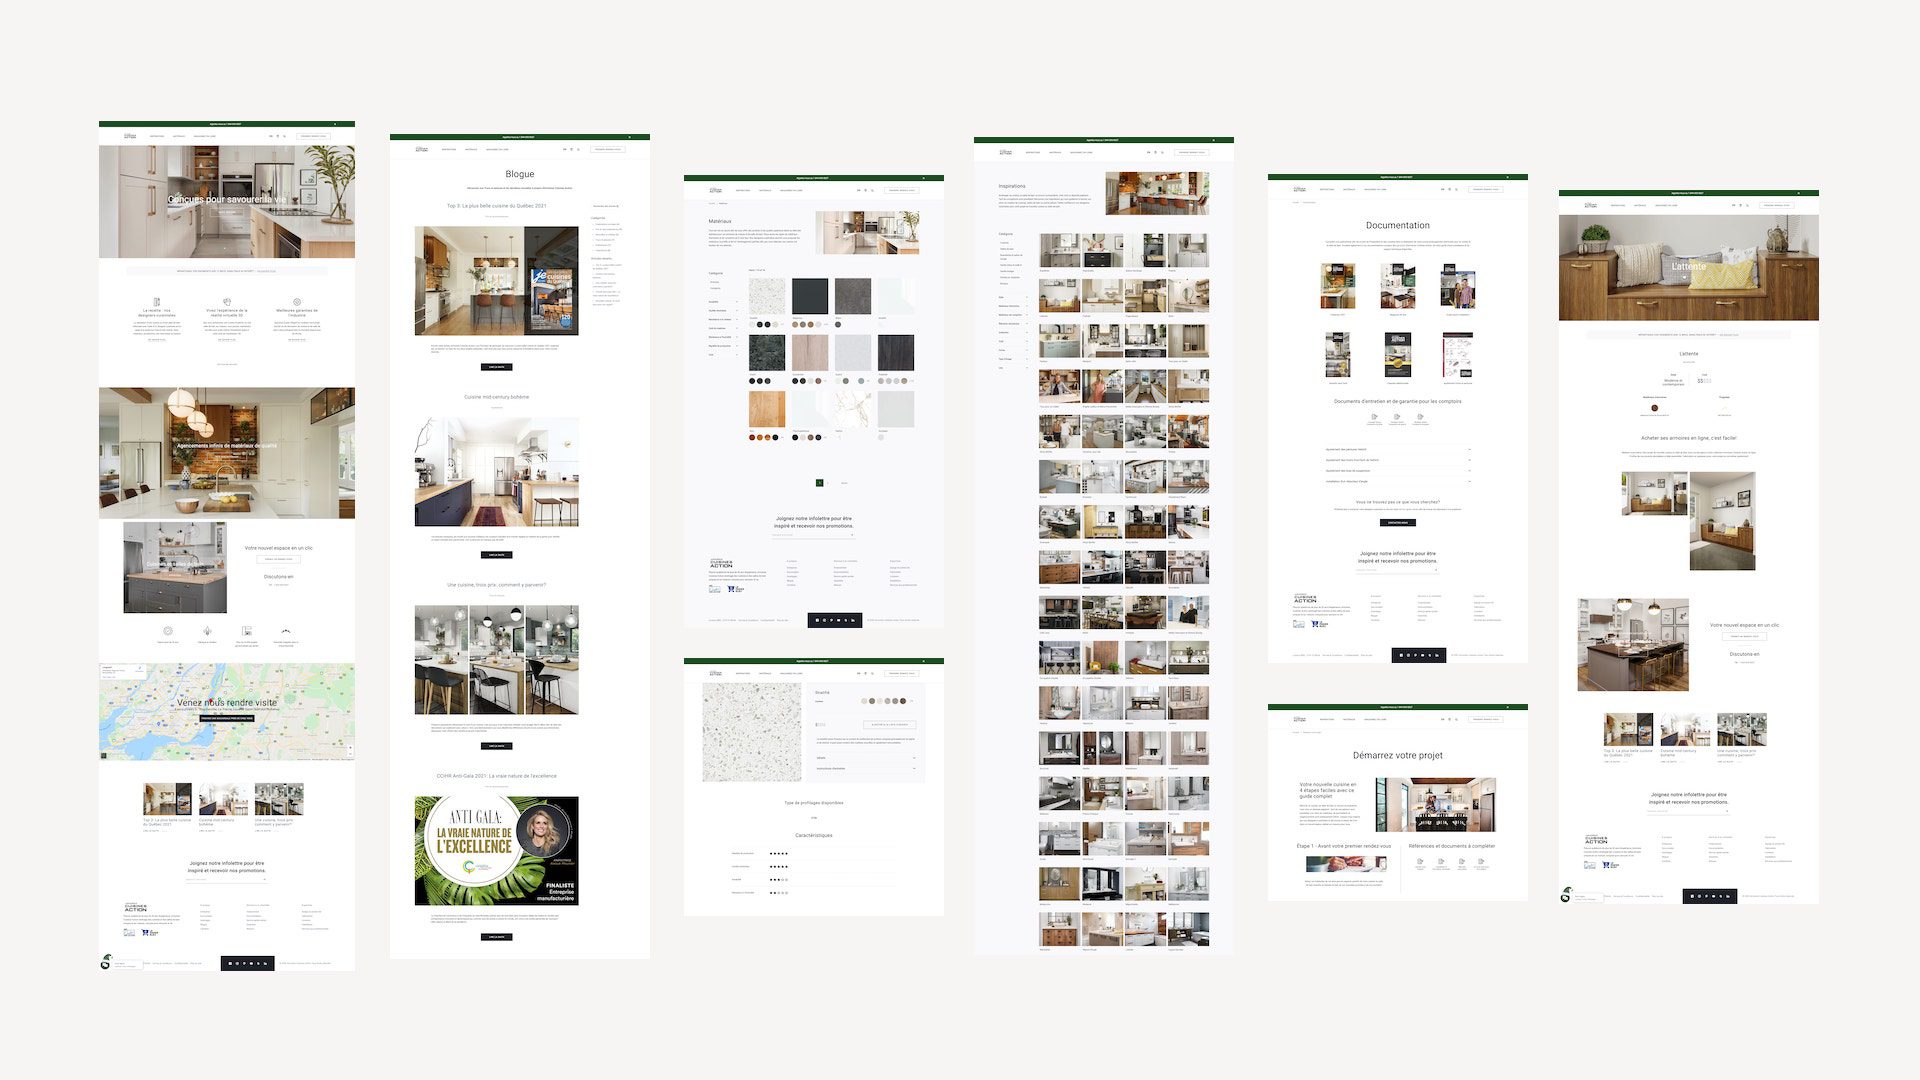 Few pages screenshots developed by our magento agency.